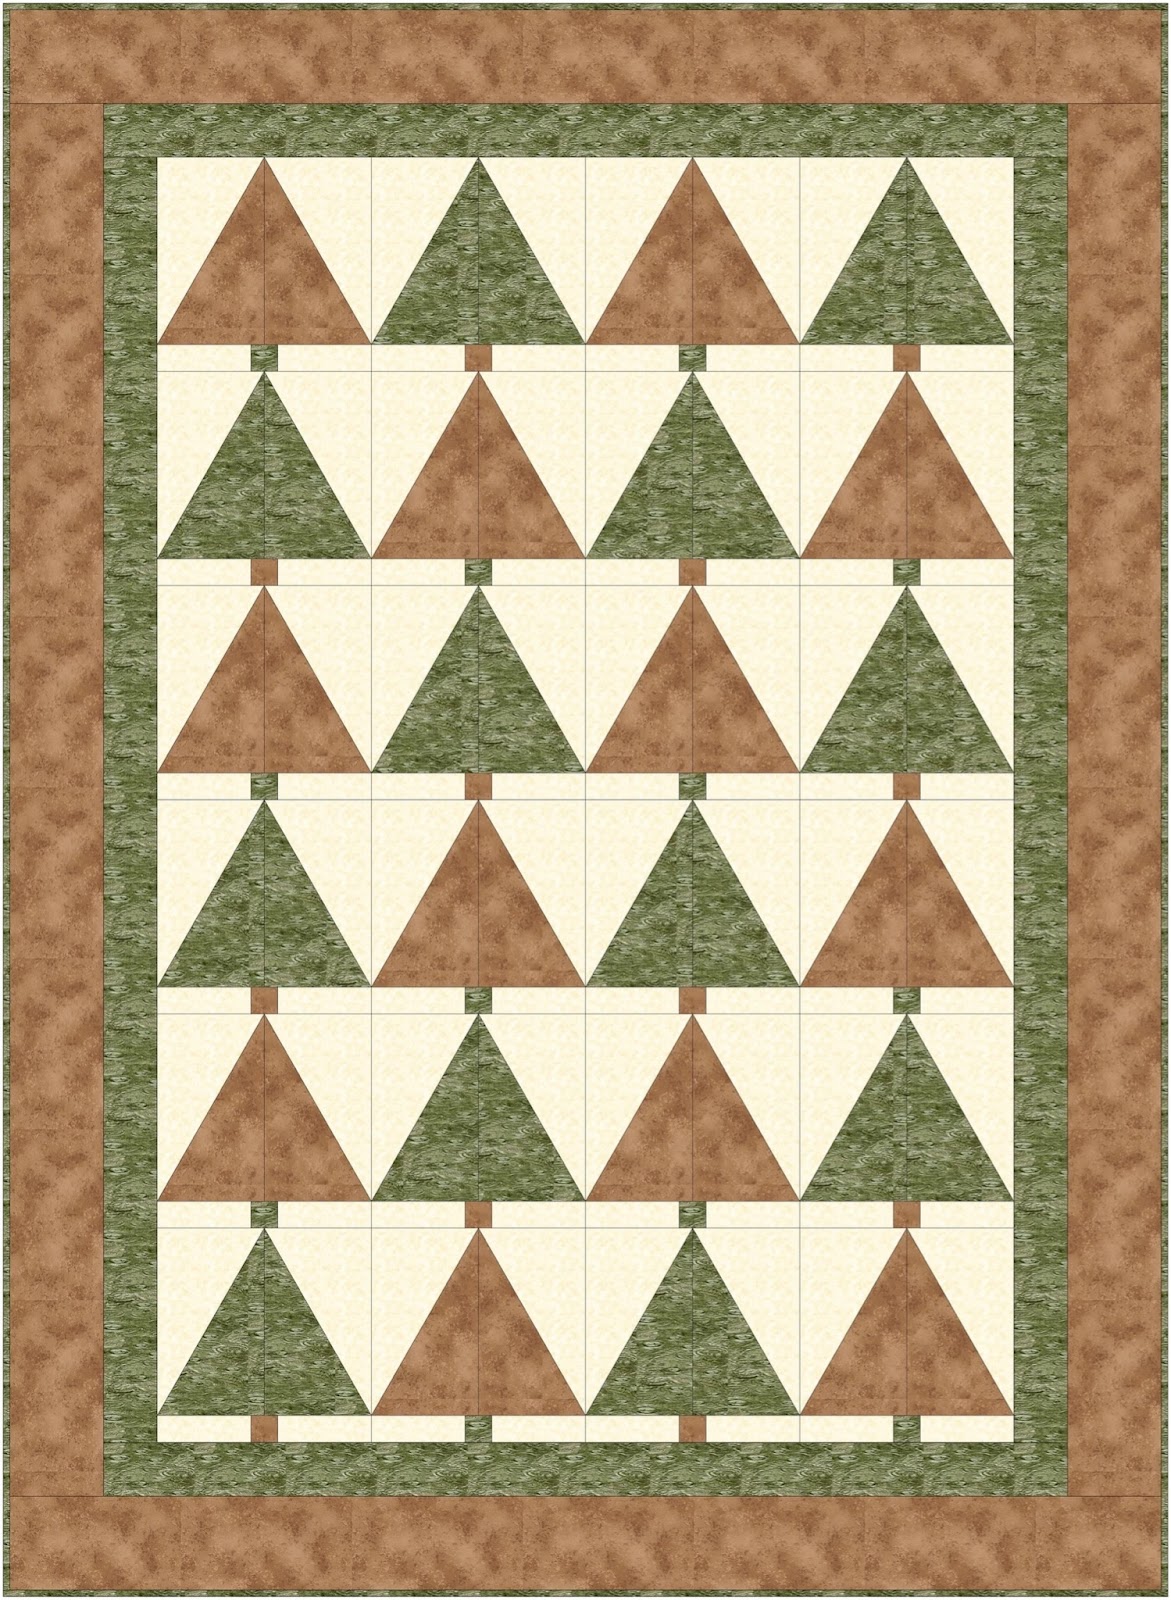 Christmas forest 3-Yard Quilt Patterns 